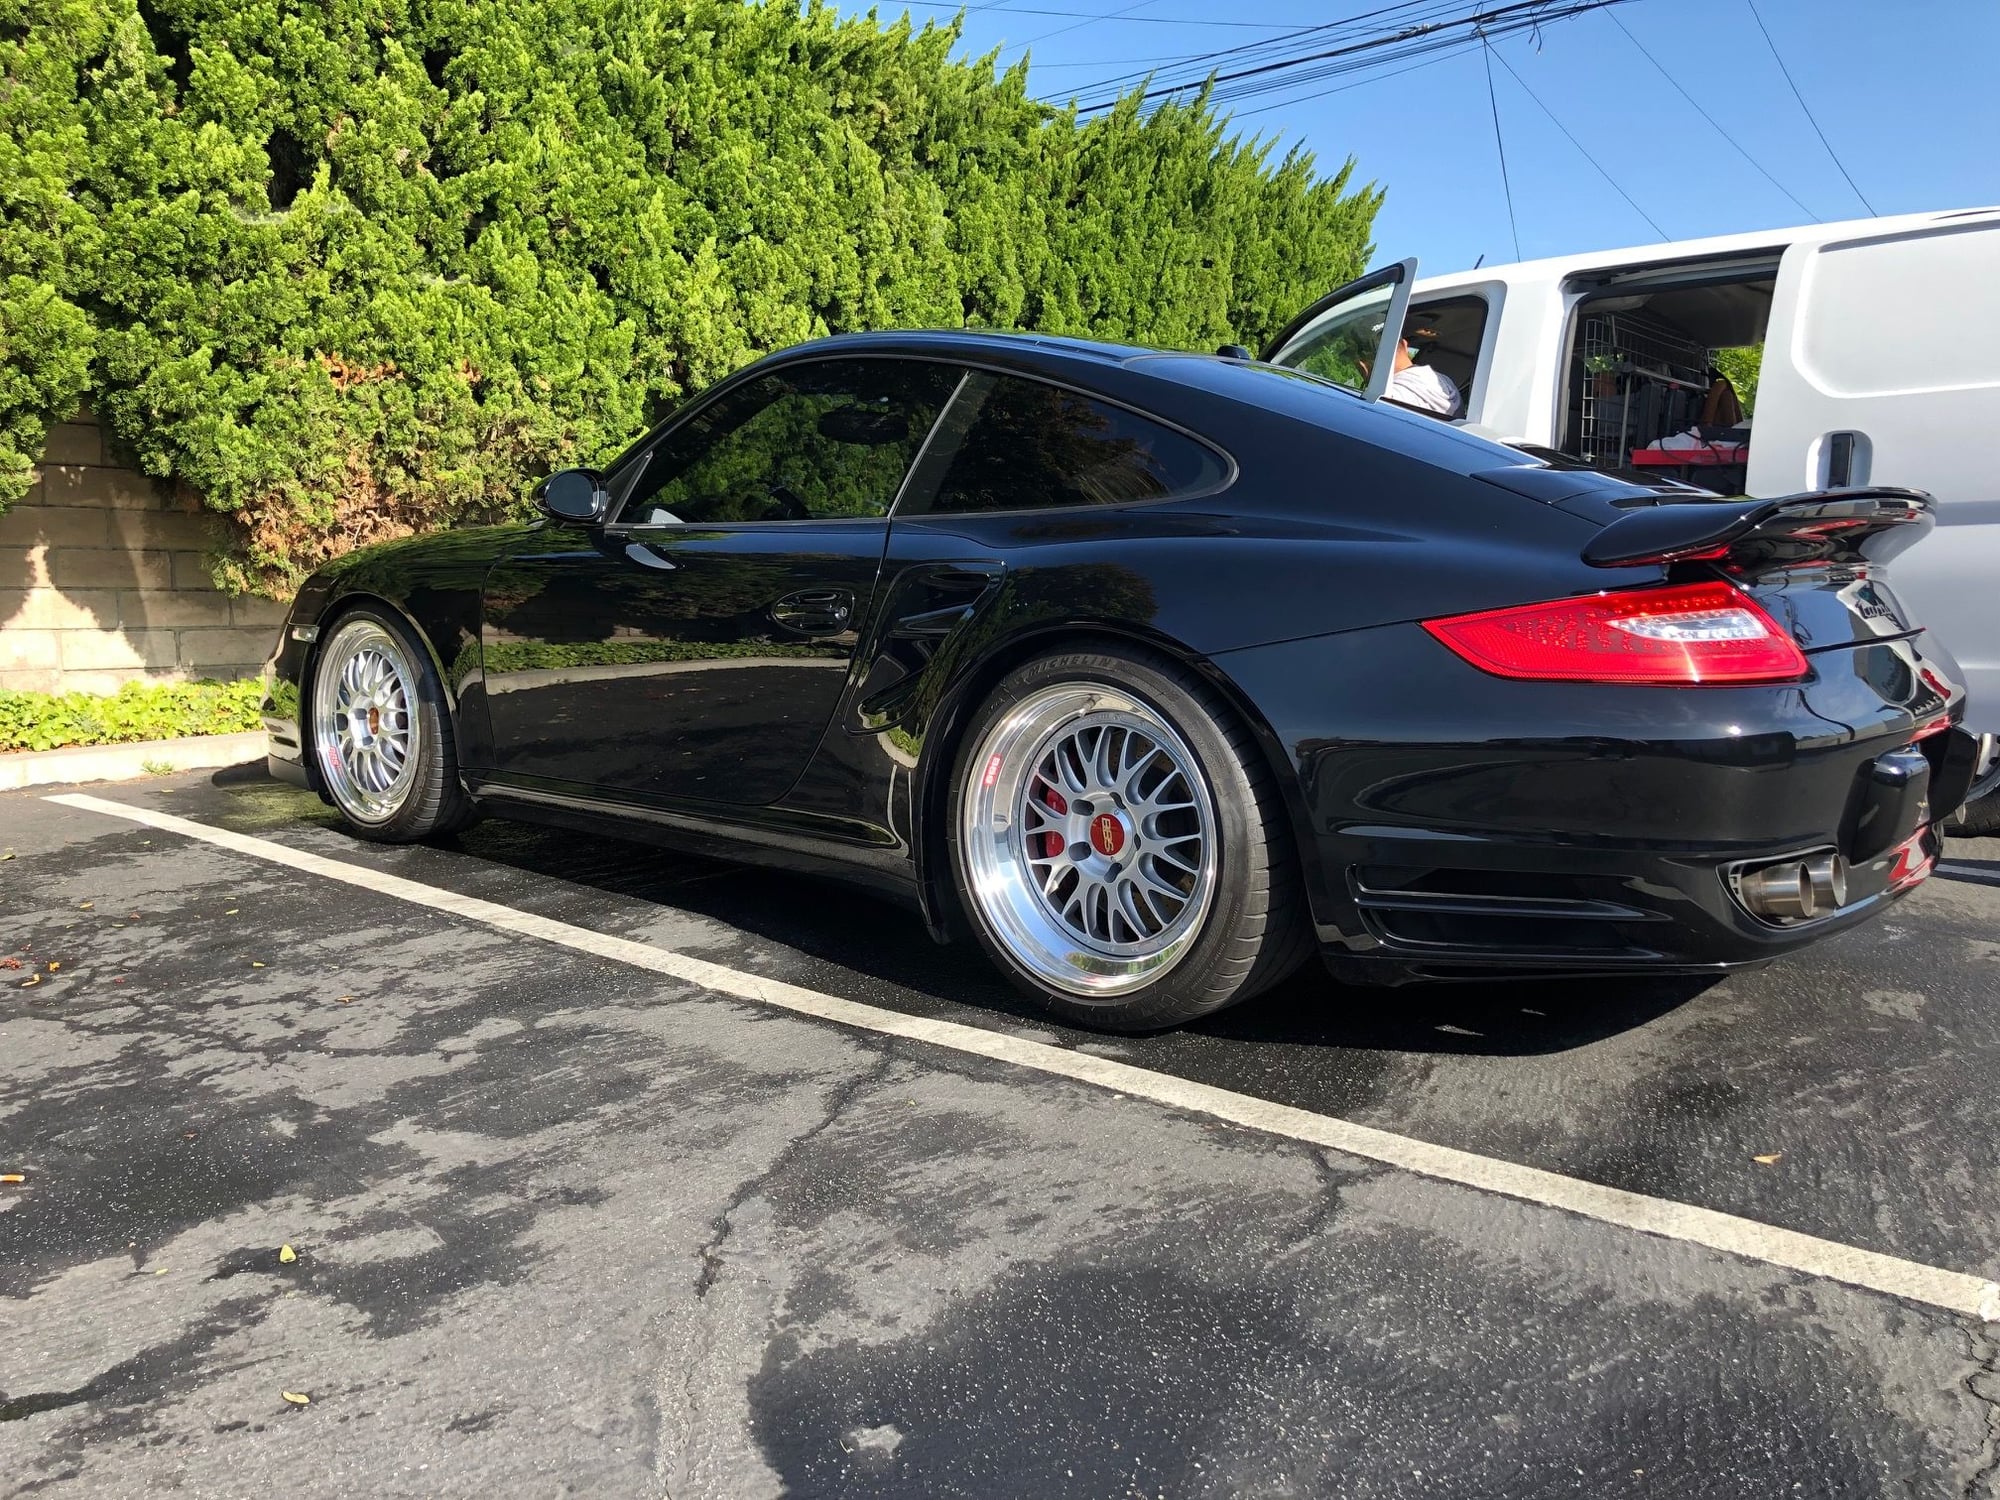 2009 Porsche 911 - 2009 911 Turbo Coupe 6spd Blk/Blk w/ light mods - Used - VIN WP0AD29909S766267 - 80,020 Miles - 6 cyl - AWD - Manual - Coupe - Black - Torrance, CA 90505, United States